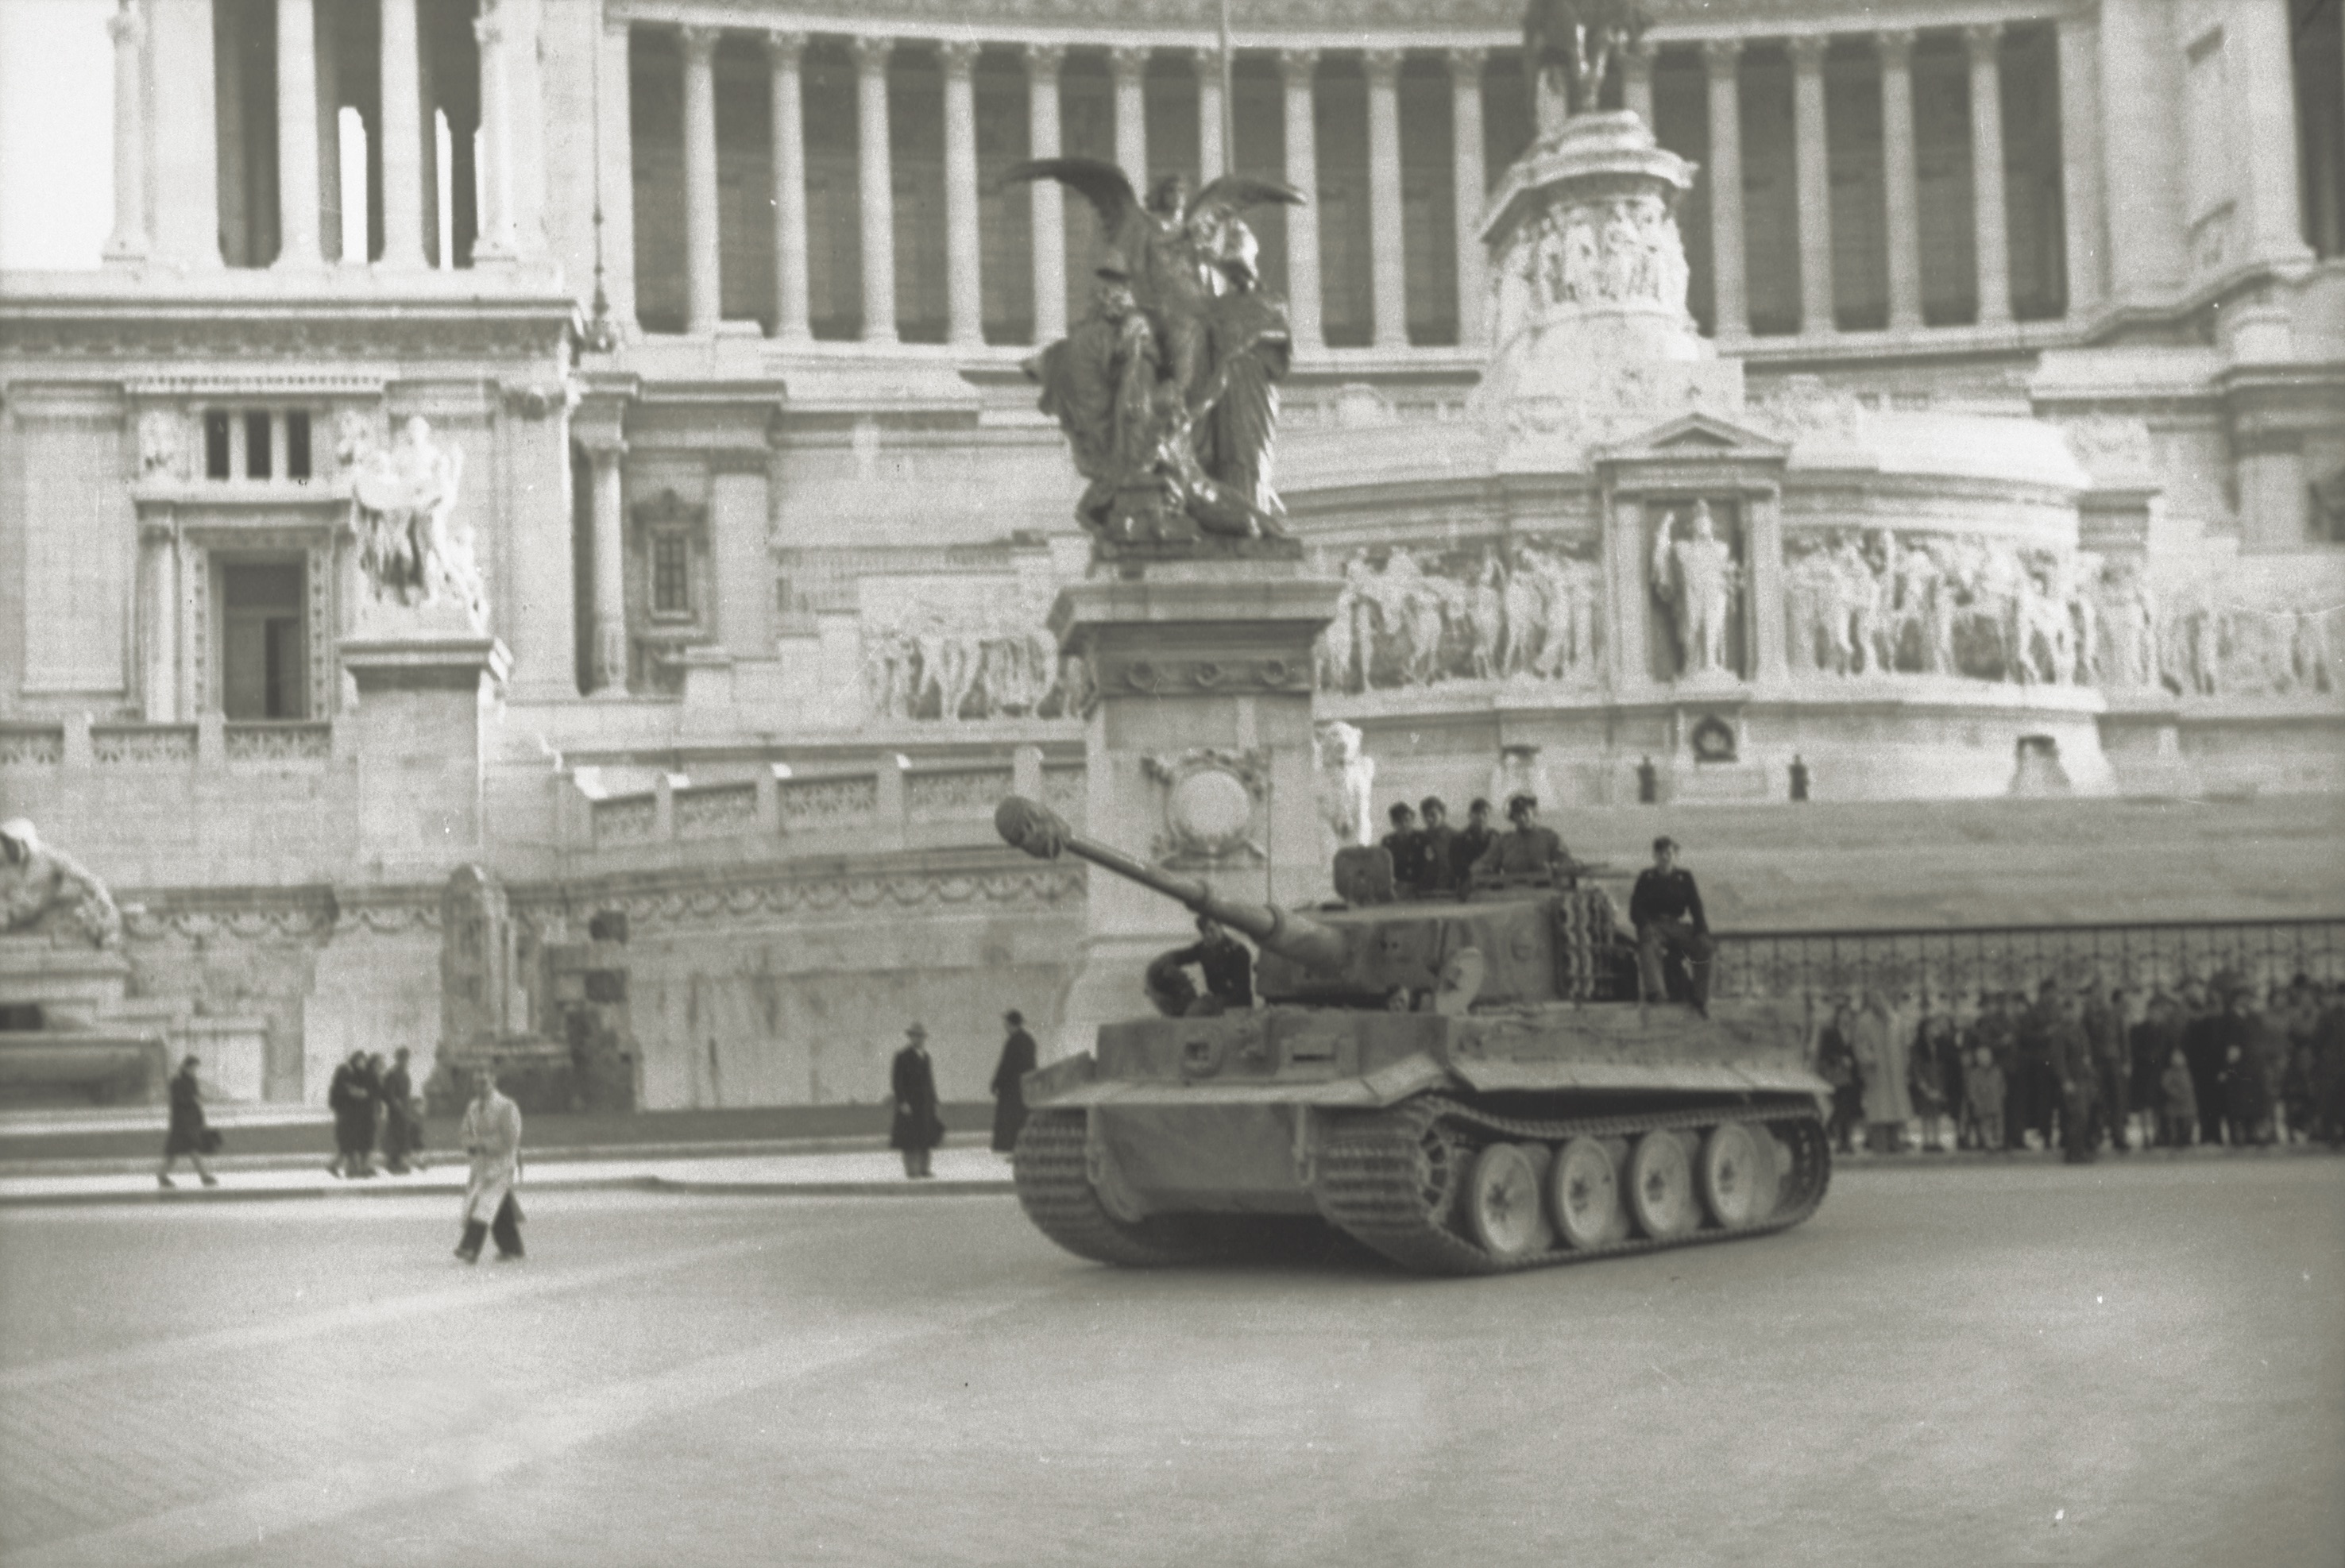 The arrival of German forces in Rome following Benito Mussolini’s 1943 fall from power made the work of O’Flaherty and his escape line cohorts vastly more difficult and infinitely more dangerous. (Bundesarchiv)